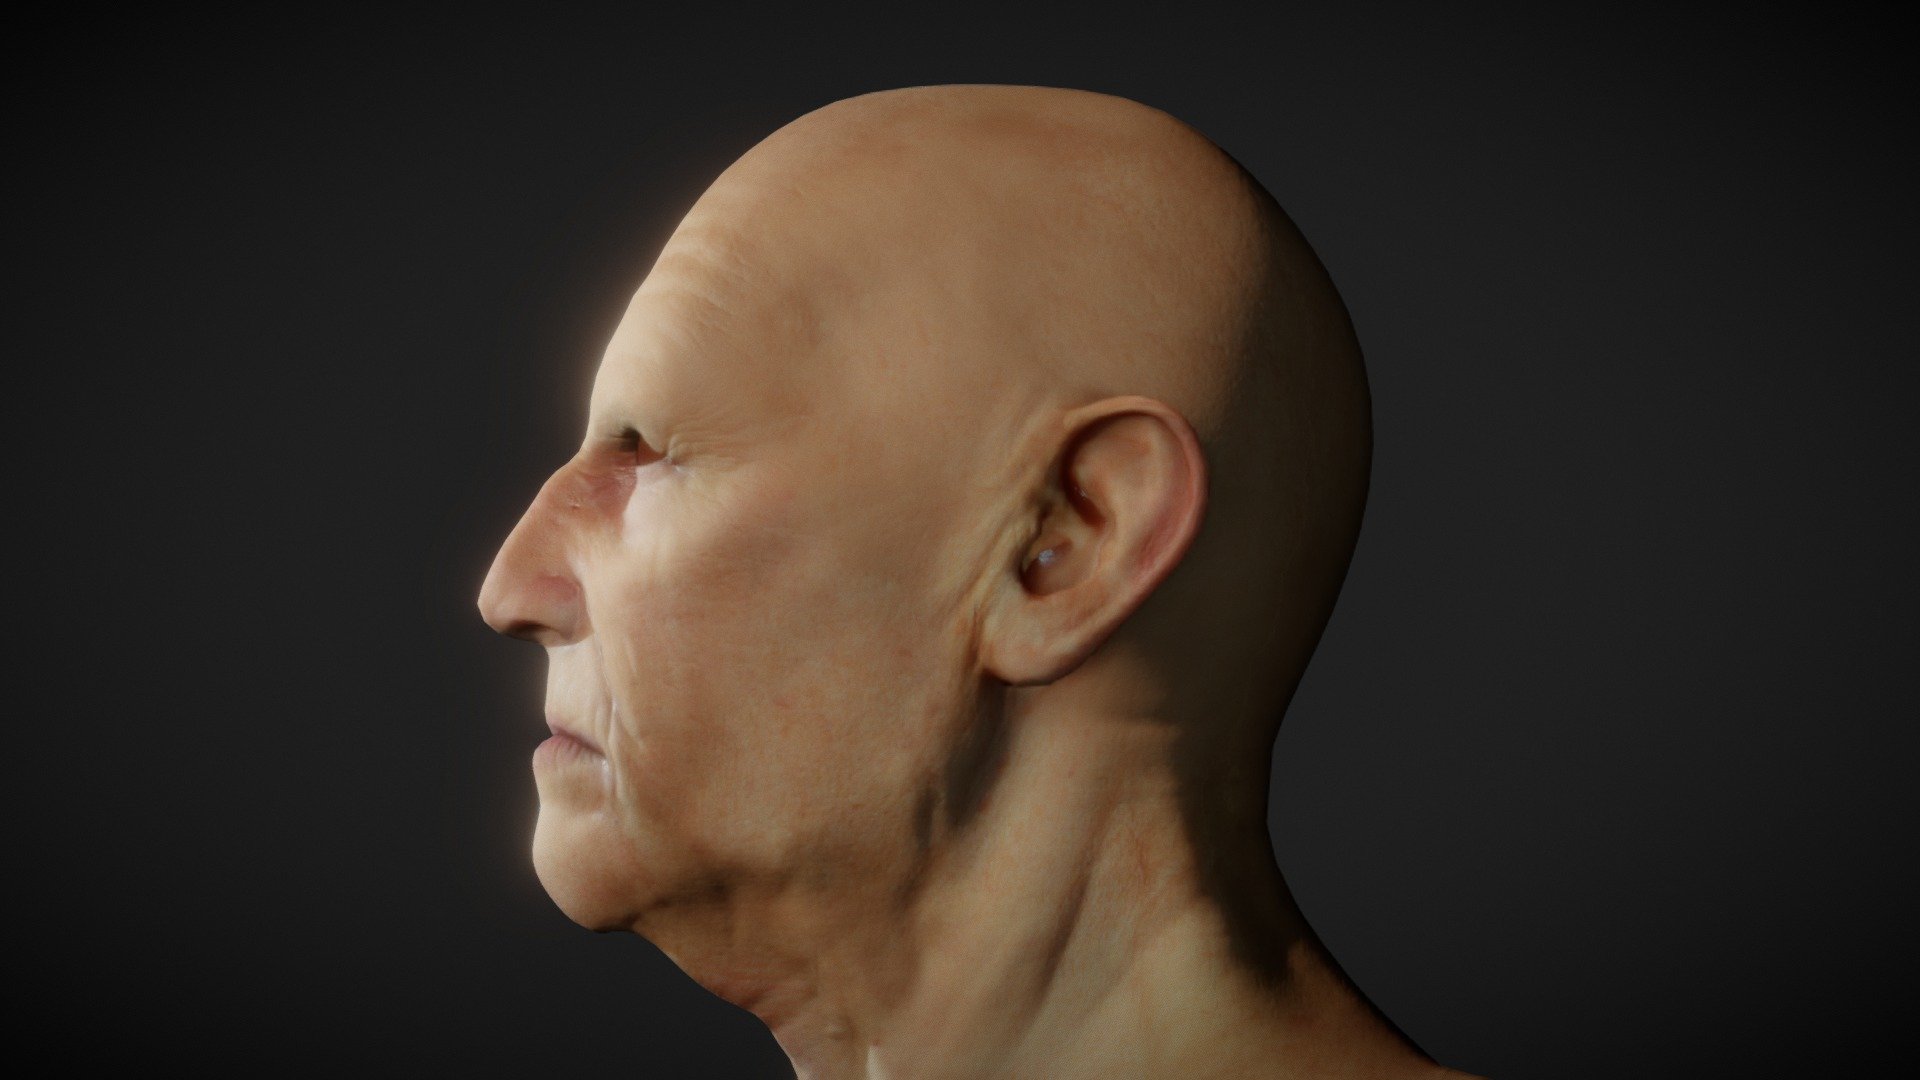 Sculpt of a generic old man done as part of anatomy study,
Sculpted in Zbrush

Perfect for simulatiung tattoos and use in Procreate 3D

For Procreate Make sure to download and use the USDZ file if you want to automatically load the model with color texture, otherwise use the OBJ - Generic old man head sculpt - Buy Royalty Free 3D model by Deftroy 3d model